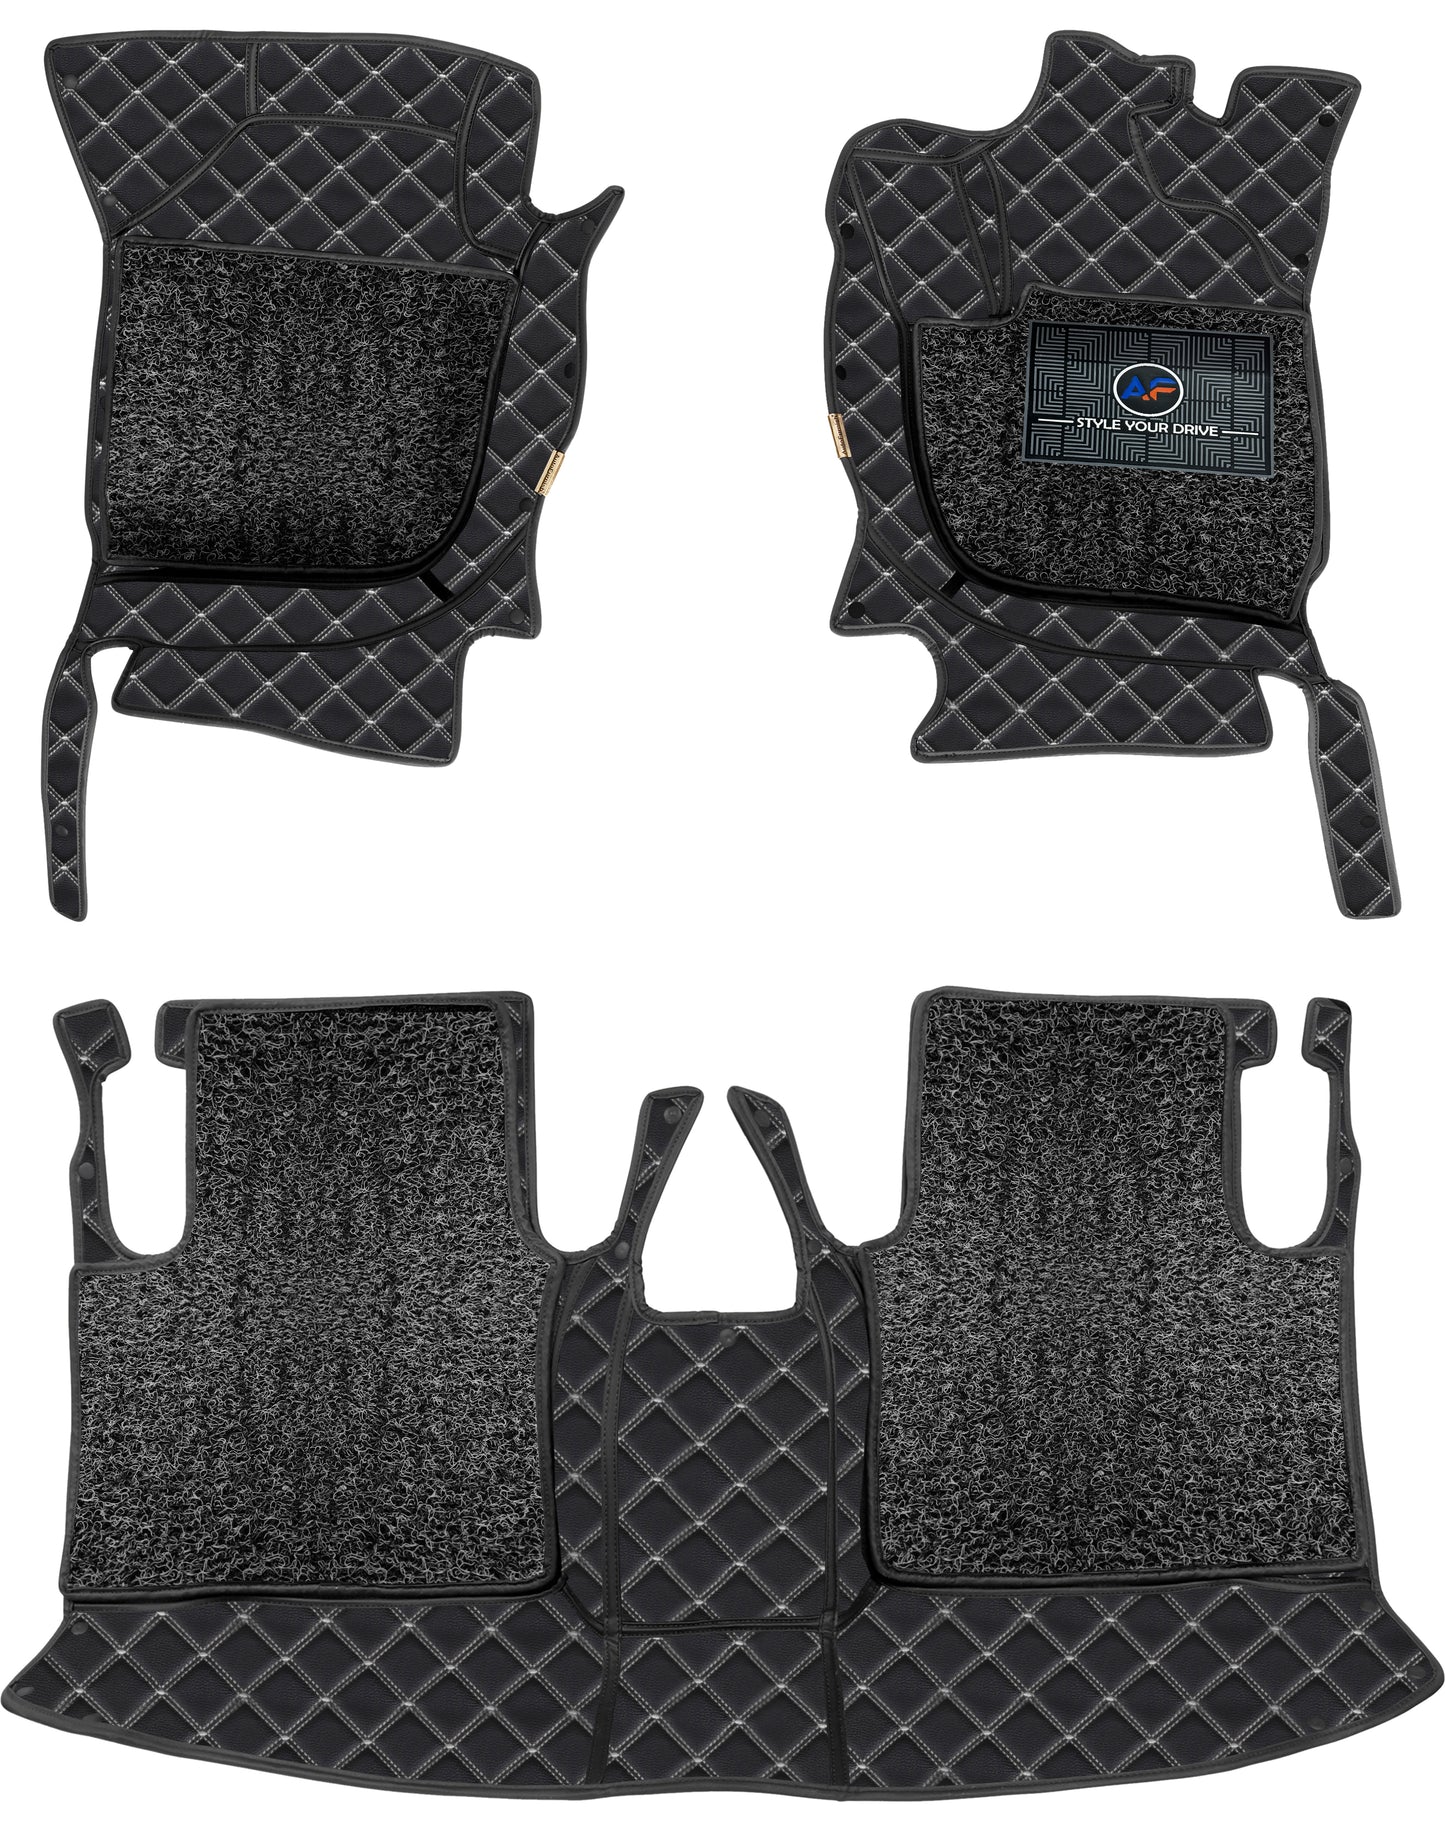 Toyota Camry (2013-19)-7D Luxury Car Mat, All Weather Proof, Anti-Skid, 100% Waterproof & Odorless with Unique Diamond Fish Design (24mm Luxury PU Leather, 2 Rows)